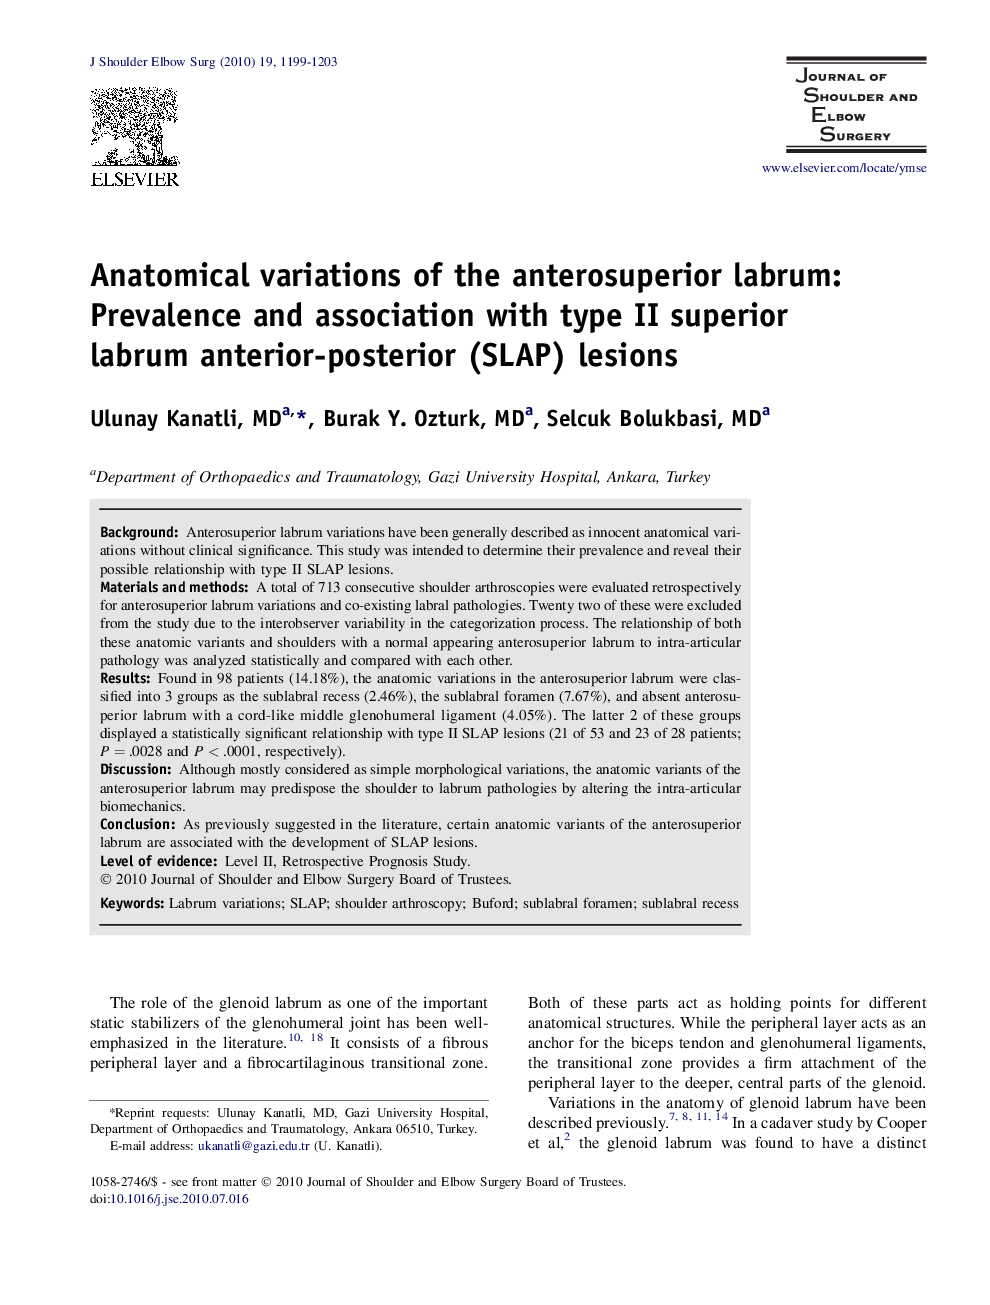 Anatomical variations of the anterosuperior labrum: Prevalence and association with type II superior labrum anterior-posterior (SLAP) lesions